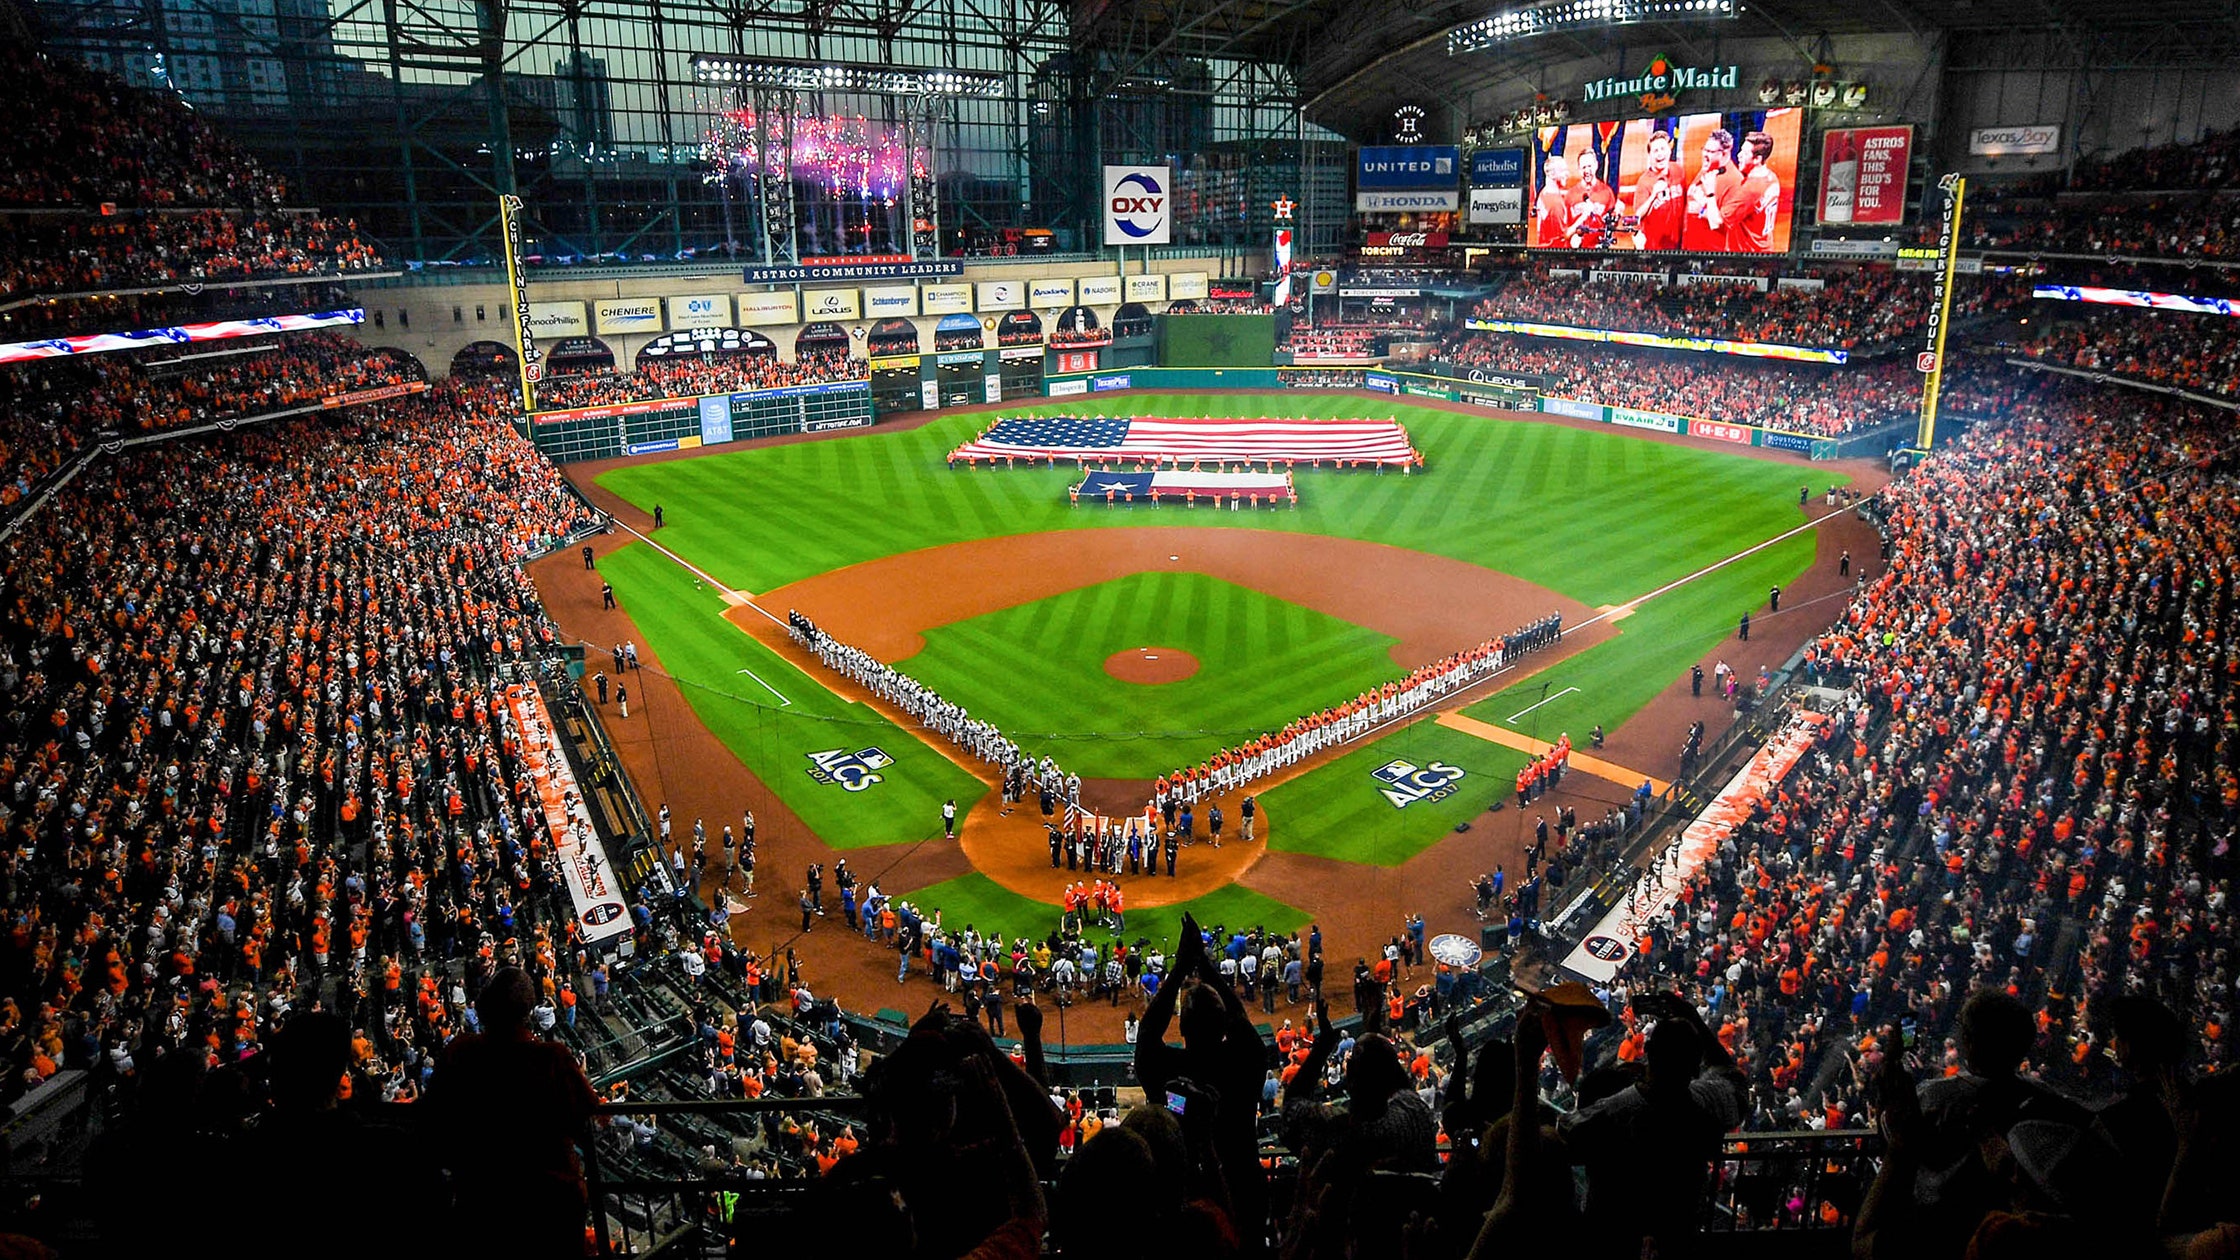 Minute Maid Park's most memorable: Game 5, 2017 World Series